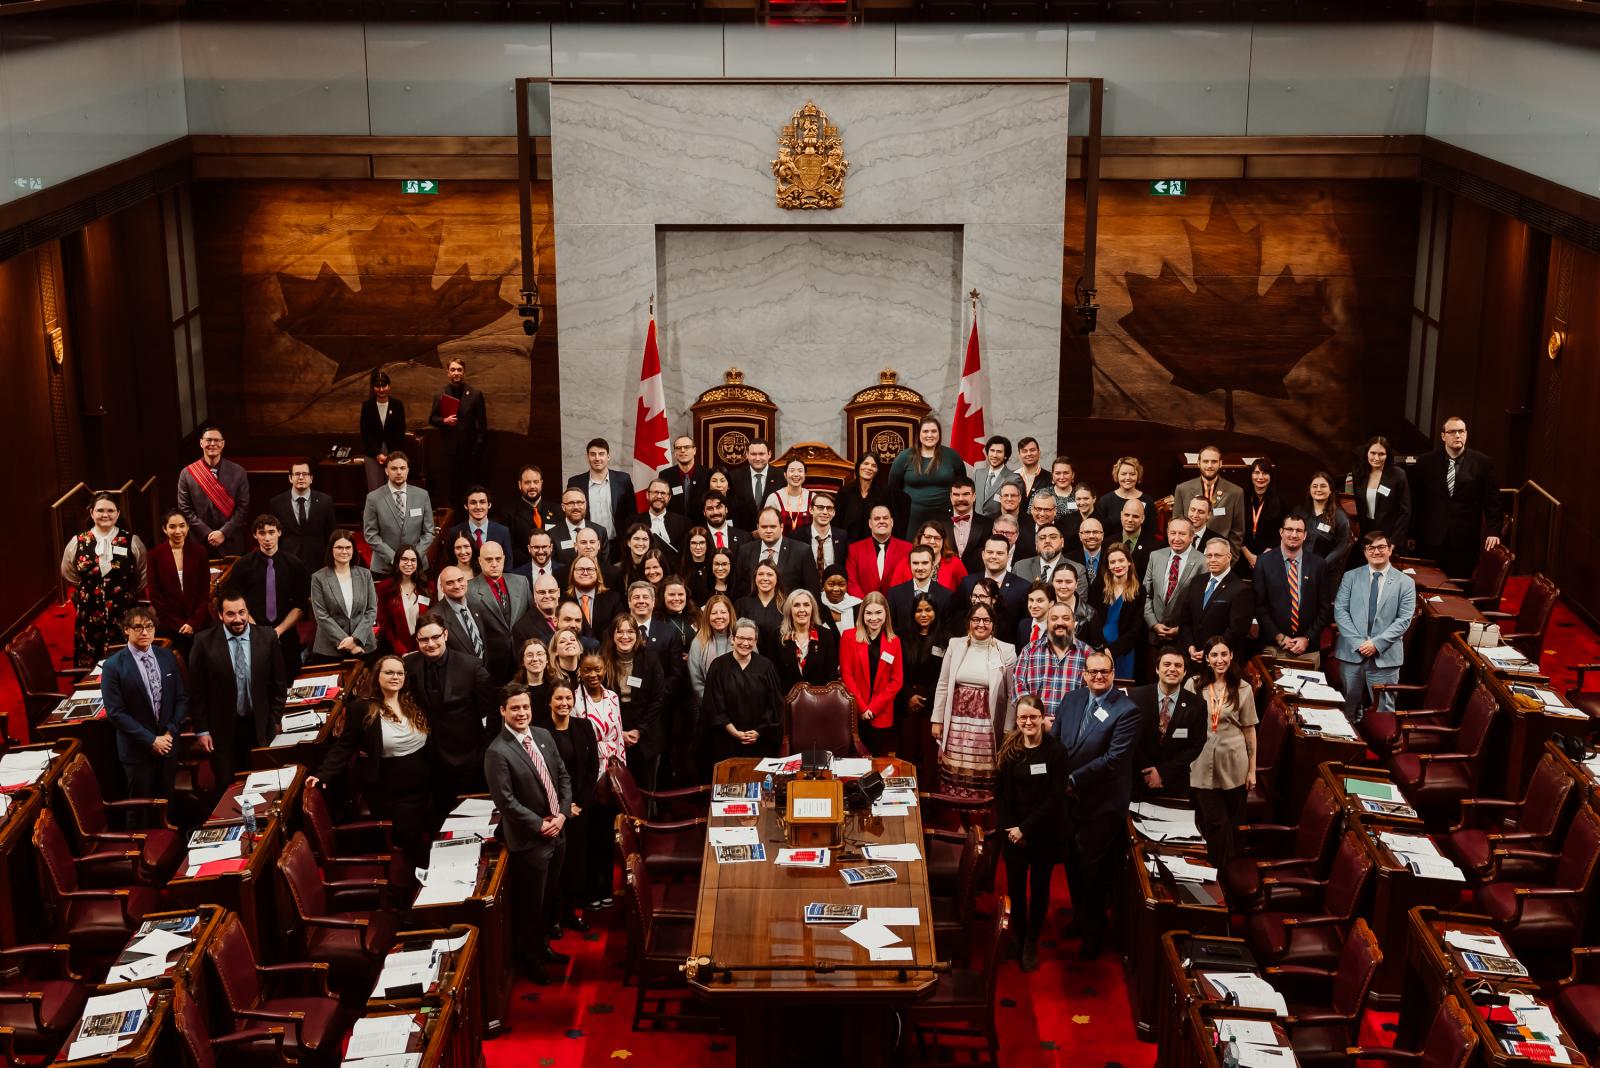 Model Parliament attendees pose for a group photo in the Senate Chamber 